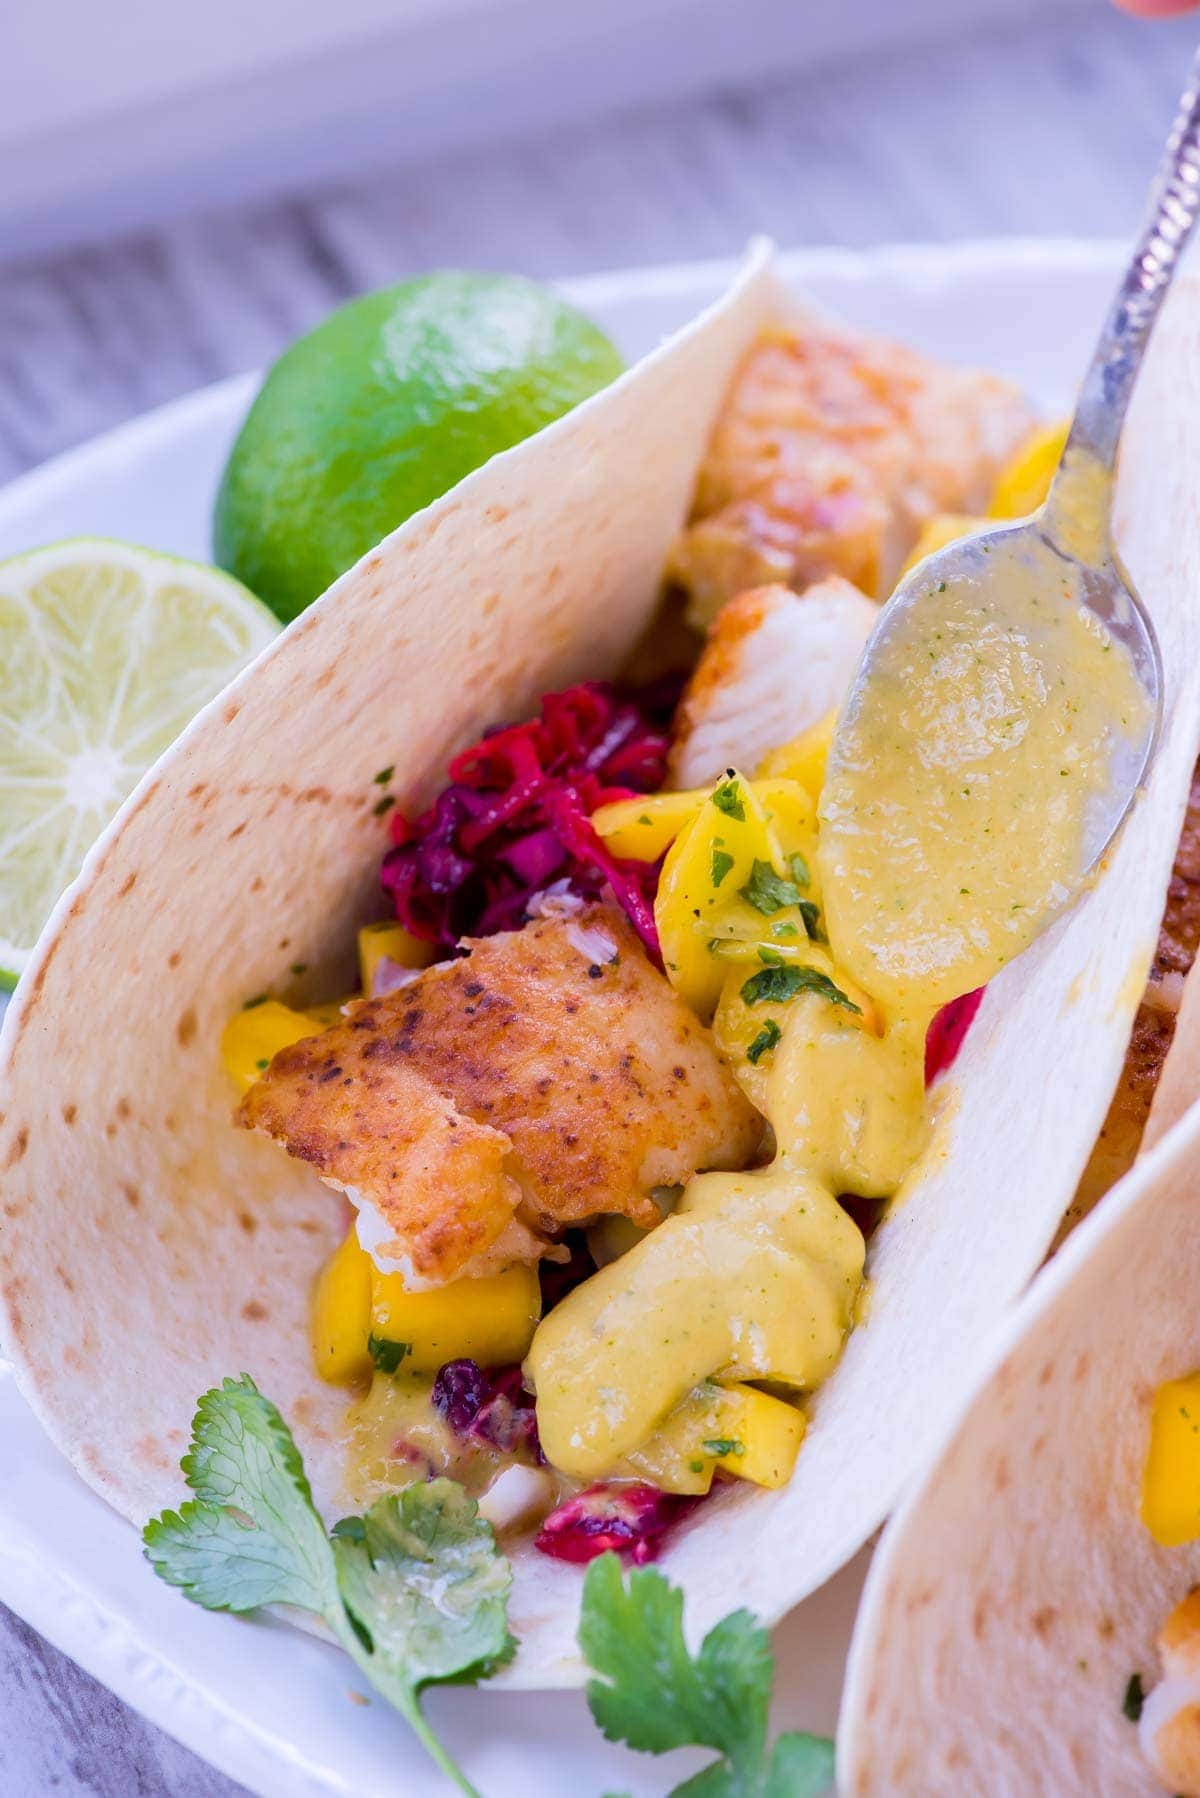 Mango sauce is being spooned over a fish taco.